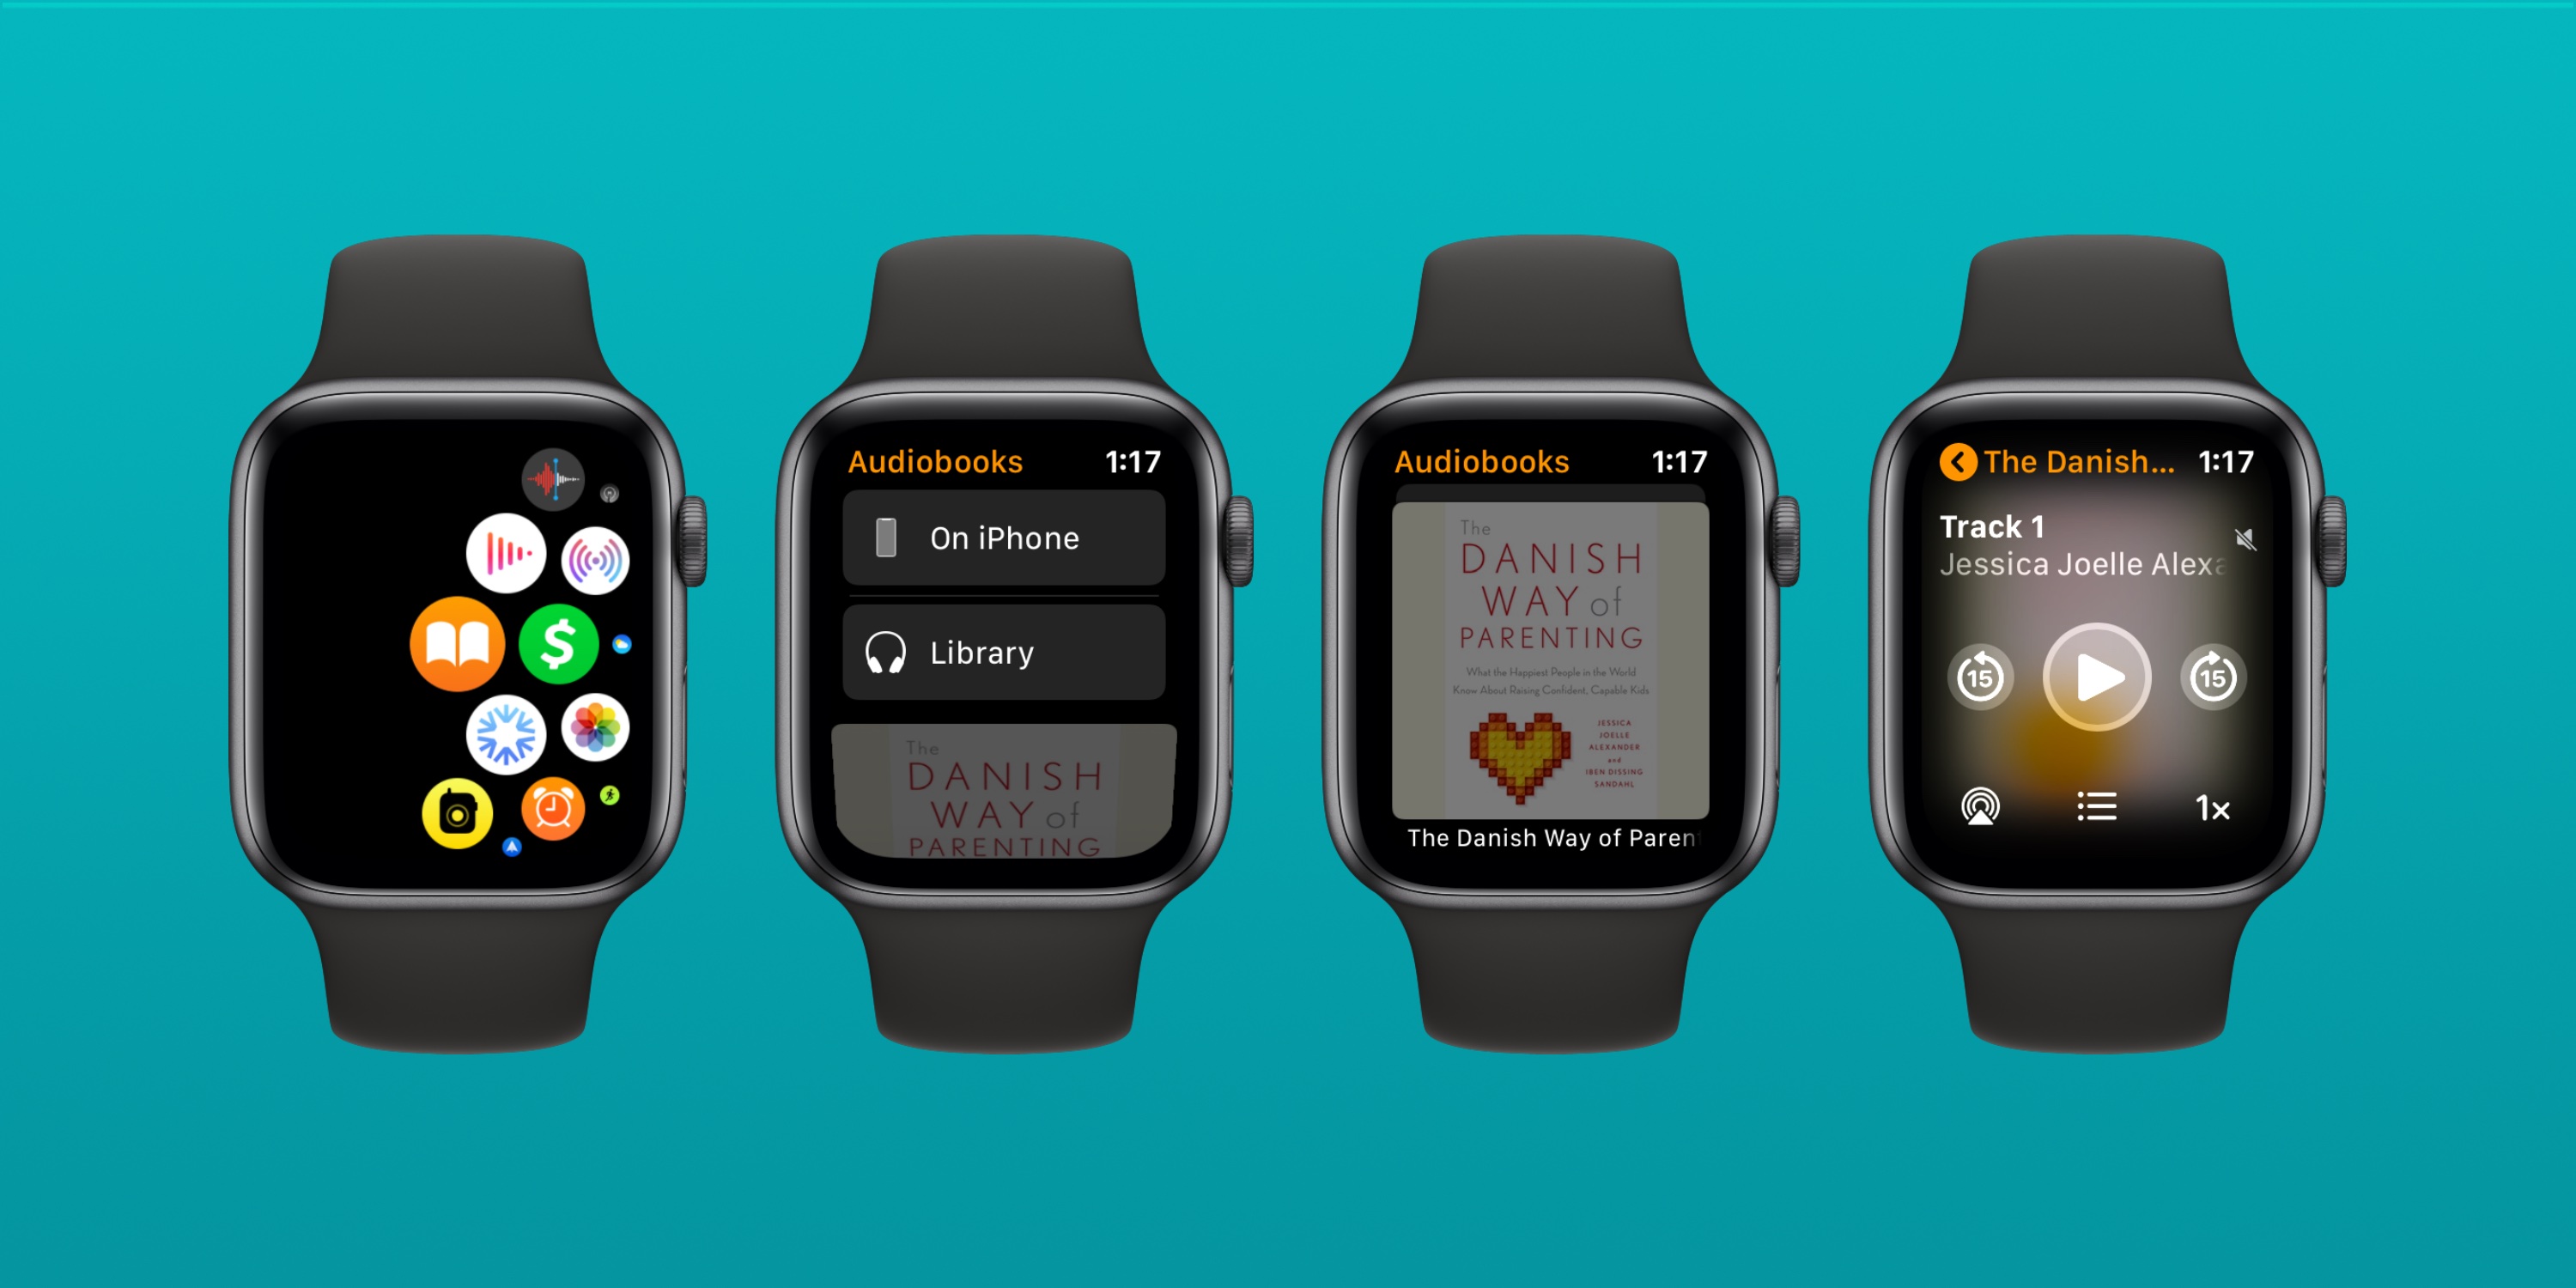 How to stream or play Apple Books audiobooks on Apple Watch watchOS 6